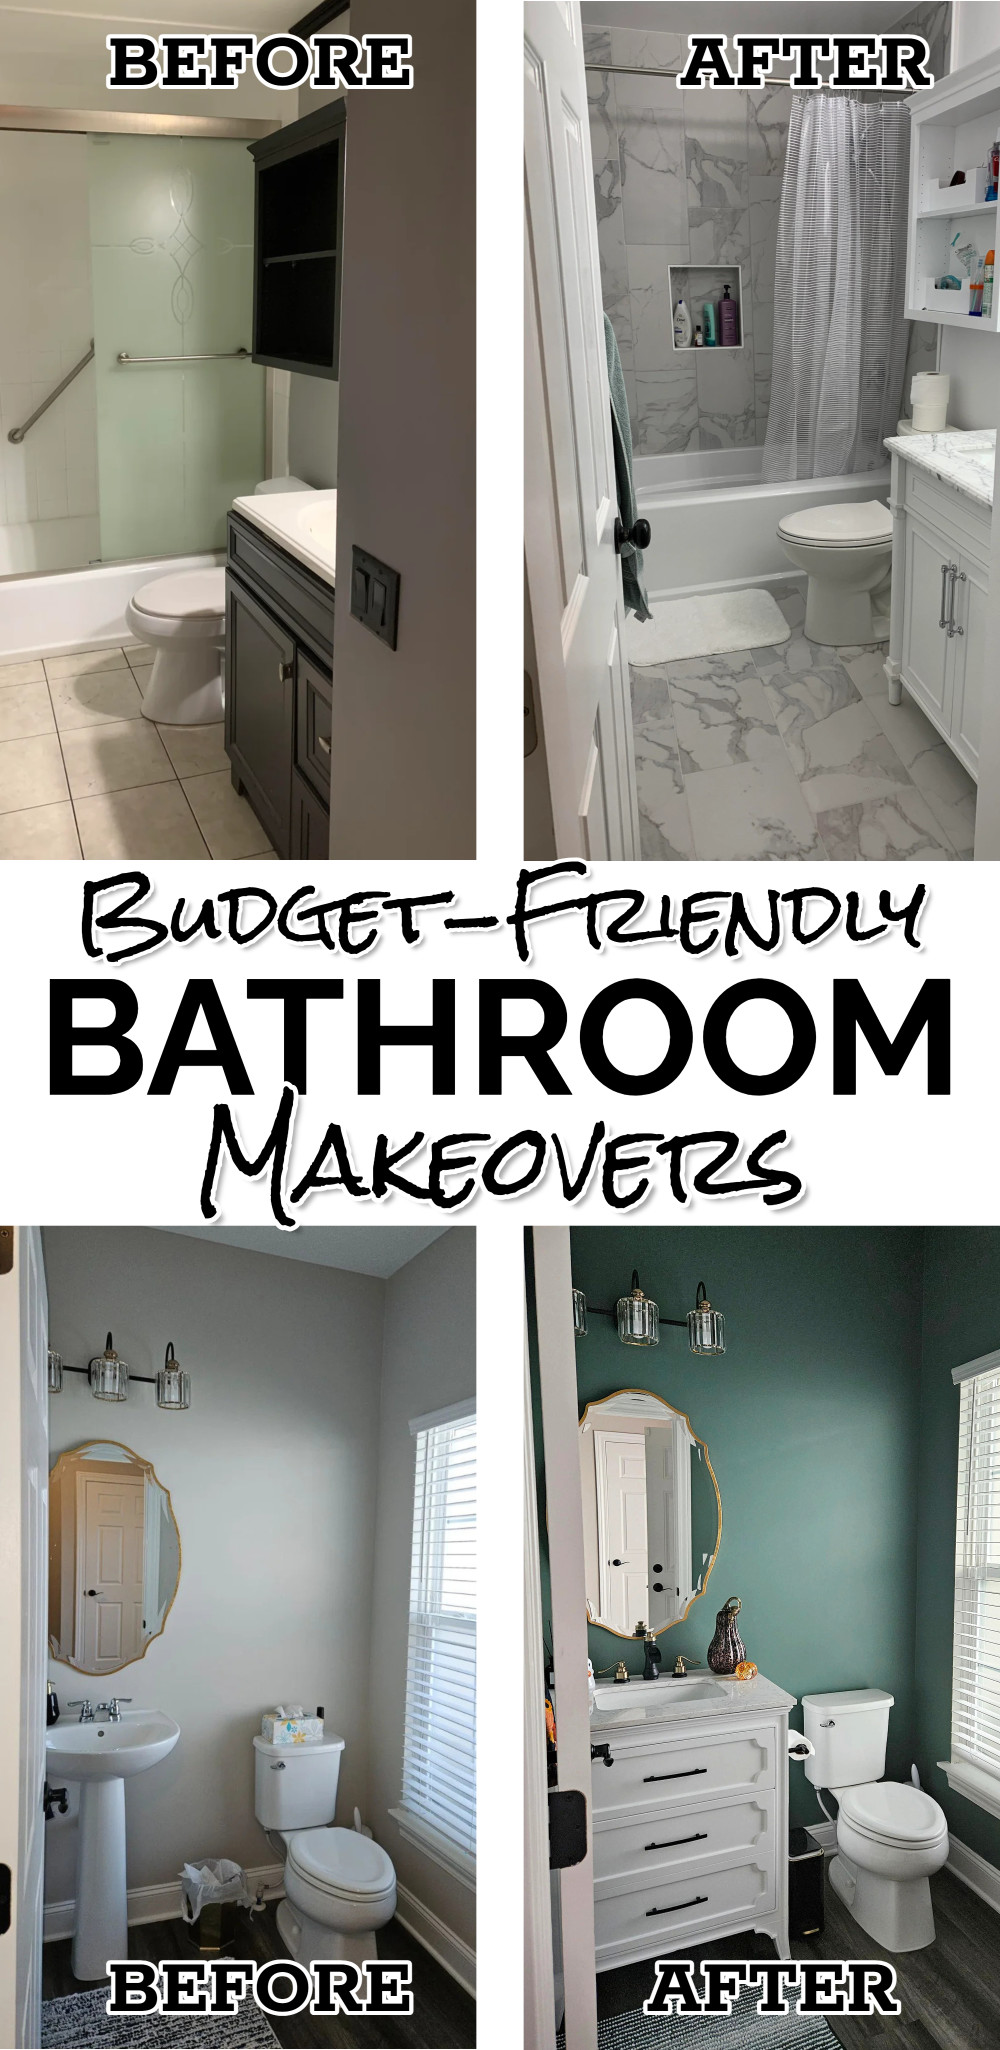 DIY Home Improvement Projects - Bathroom Makeovers Before and After Budget-Friendly Upgrades